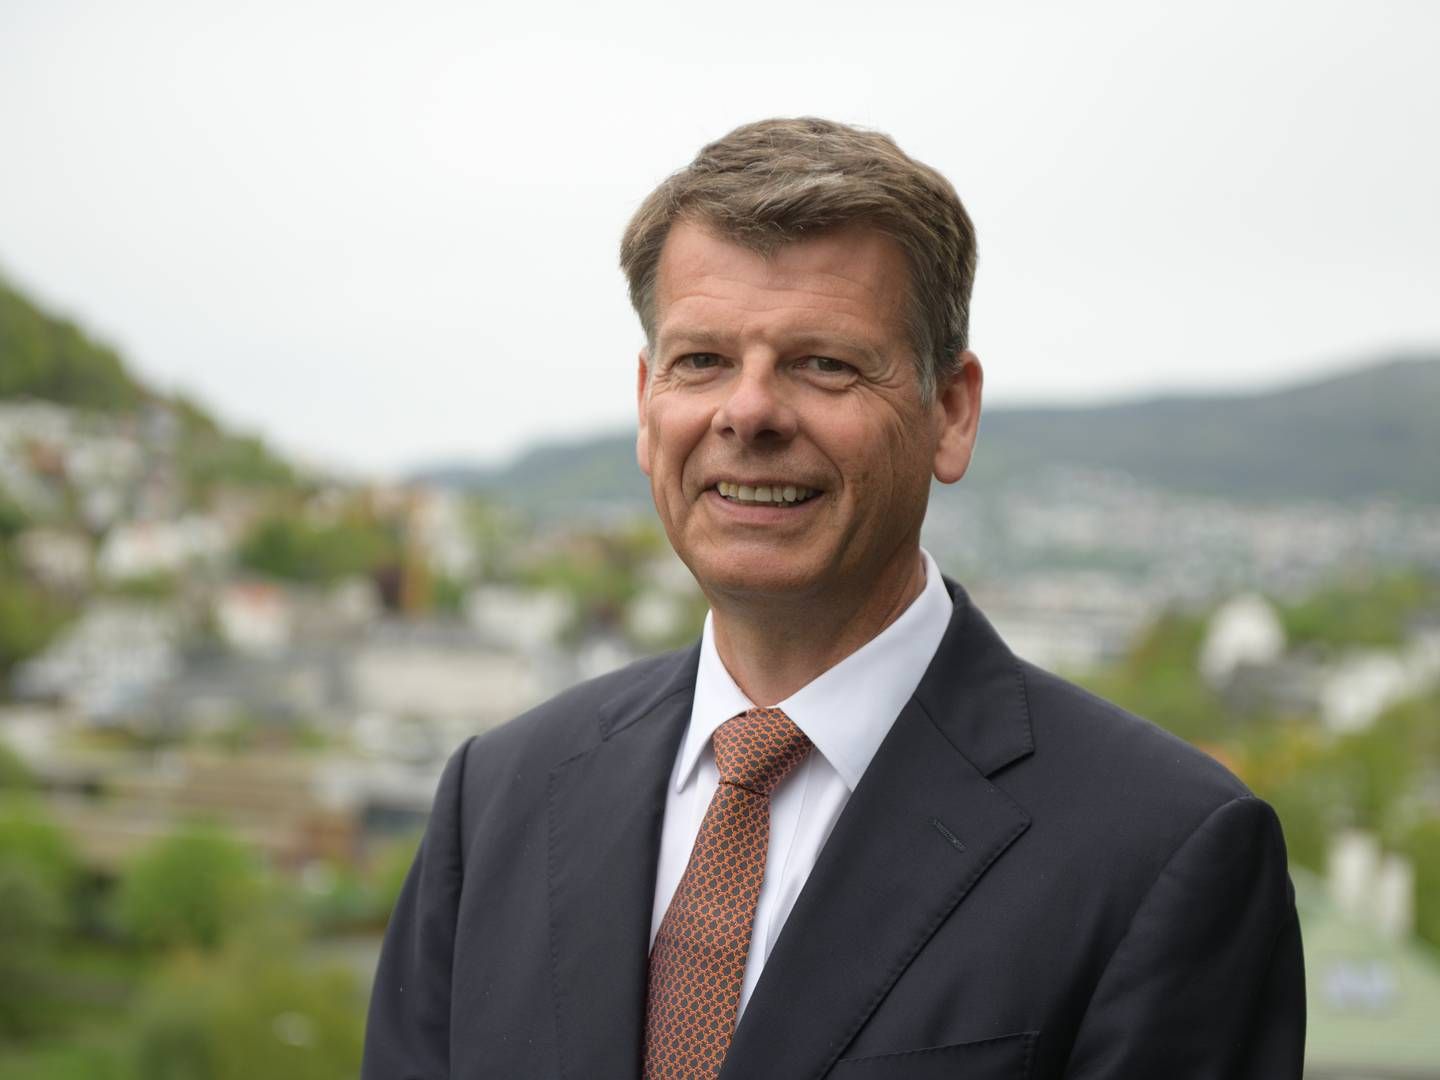 "The development of new engines that can run on alternative fuels is still a long way from being in proper supply," says Harald Fotland, CEO of Odfjell. | Photo: Gunnar Eide / Odfjell